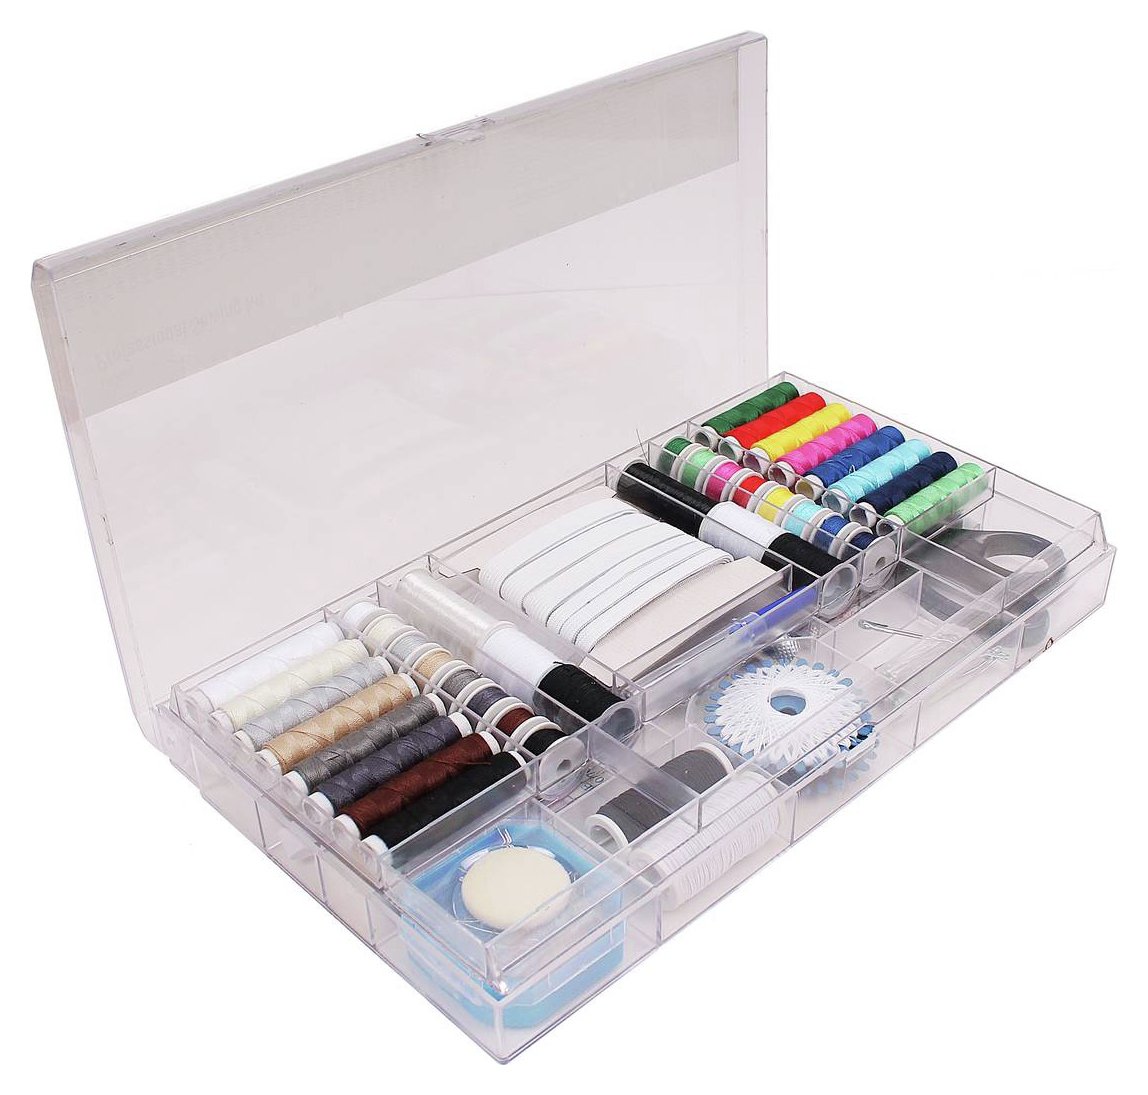 1x Professional Sewing Thread Kit 167 Piece Sewing Craft Tool Hobby Art UK 